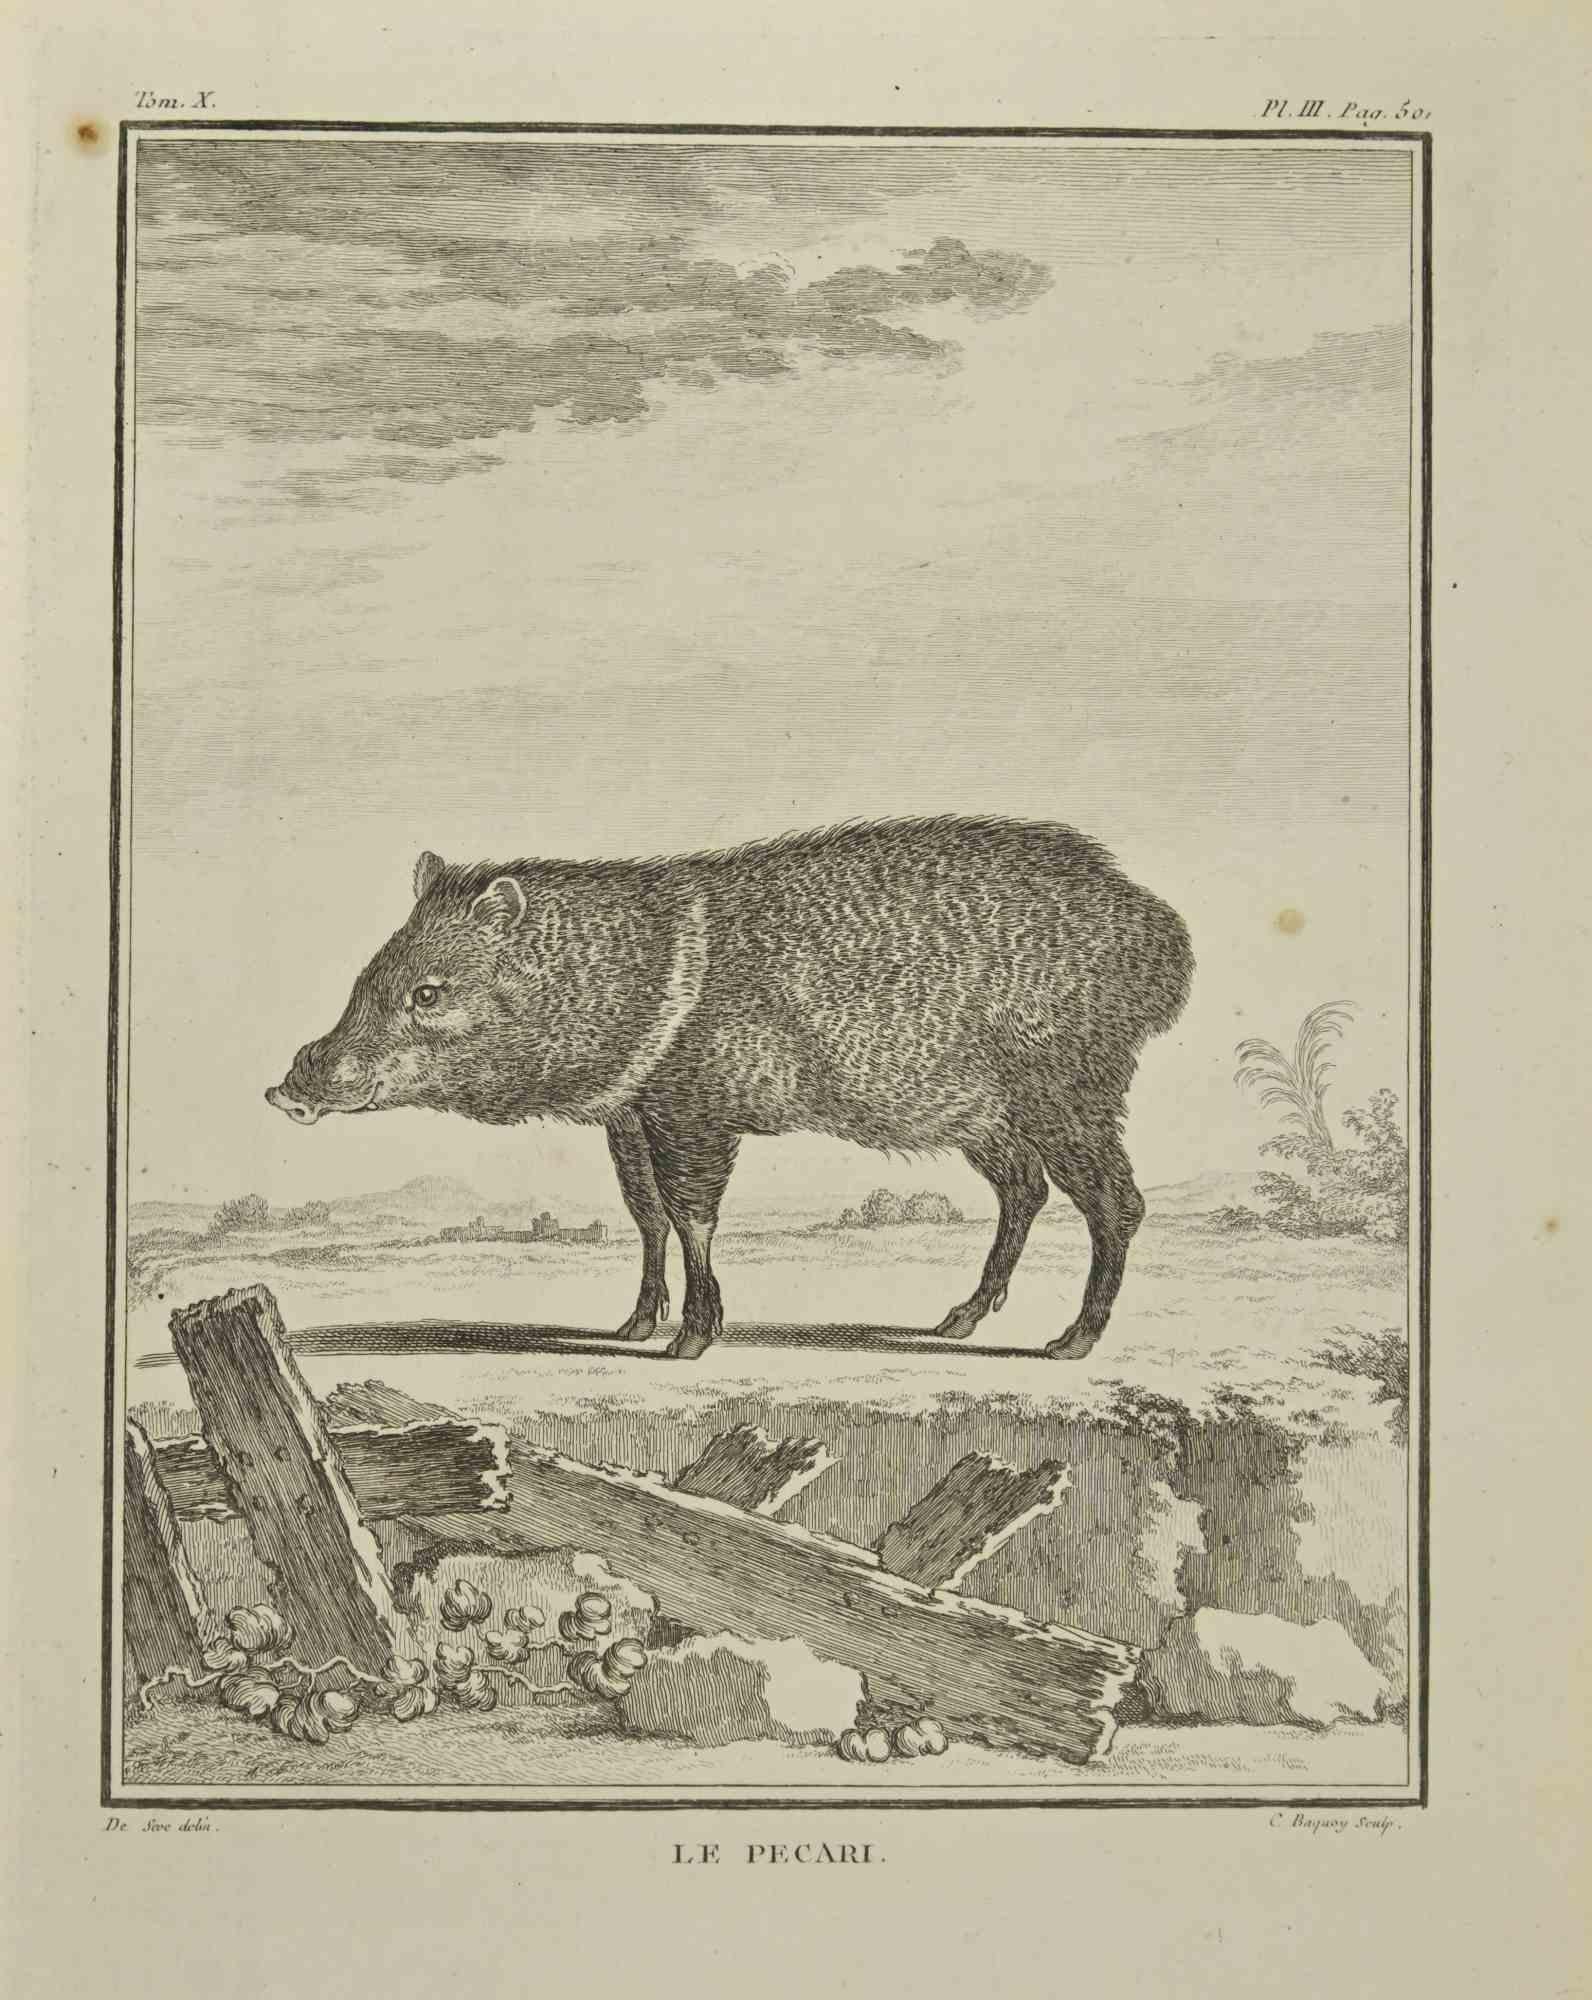 Le Pecari is an etching realized by Jean Charles Baquoy in 1771.

It belongs to the suite "Histoire Naturelle de Buffon".

The Artist's signature is engraved lower right.

Good conditions.